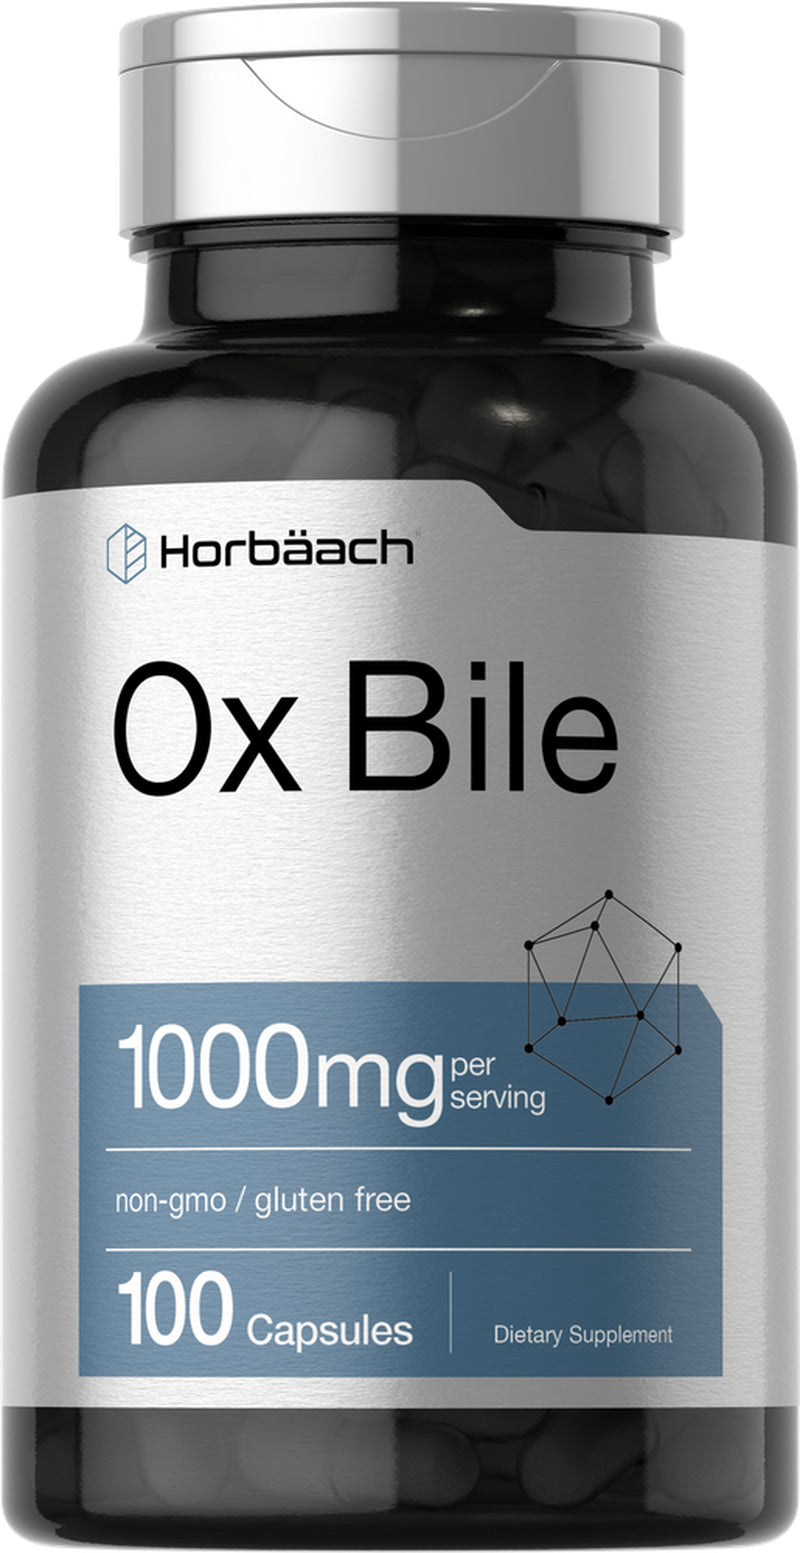 Ox Bile 1000Mg | 100 Capsules | Digestive Enzymes Supplement | by Horbaach